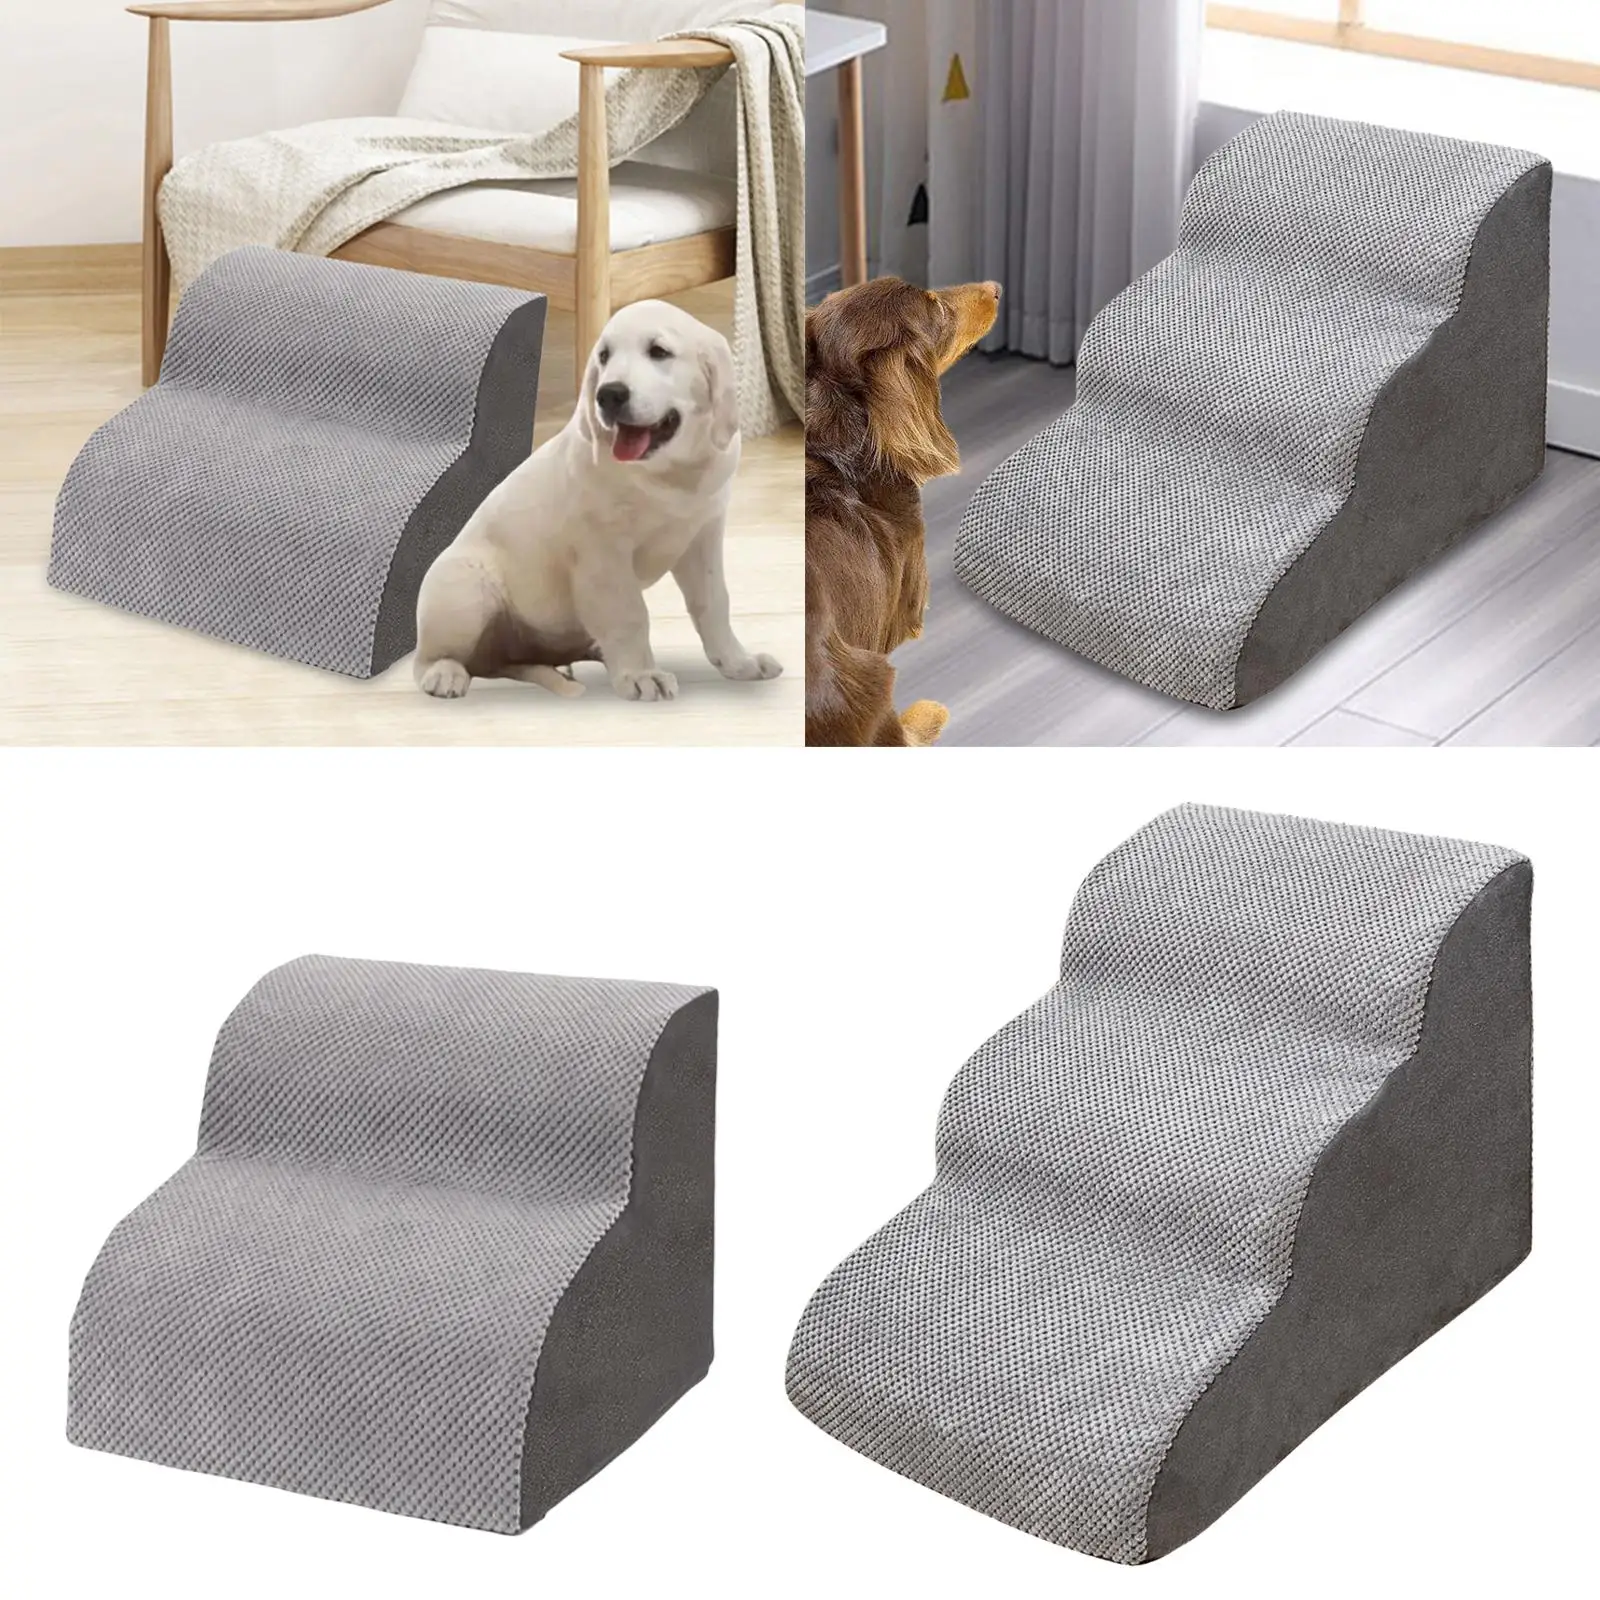 Pet Dog Stairs Ladder Durable Dog Bed Stair Detachable Washable Cover Pet Ramp for High Bed Indoor Cats Couch Home Older Dogs